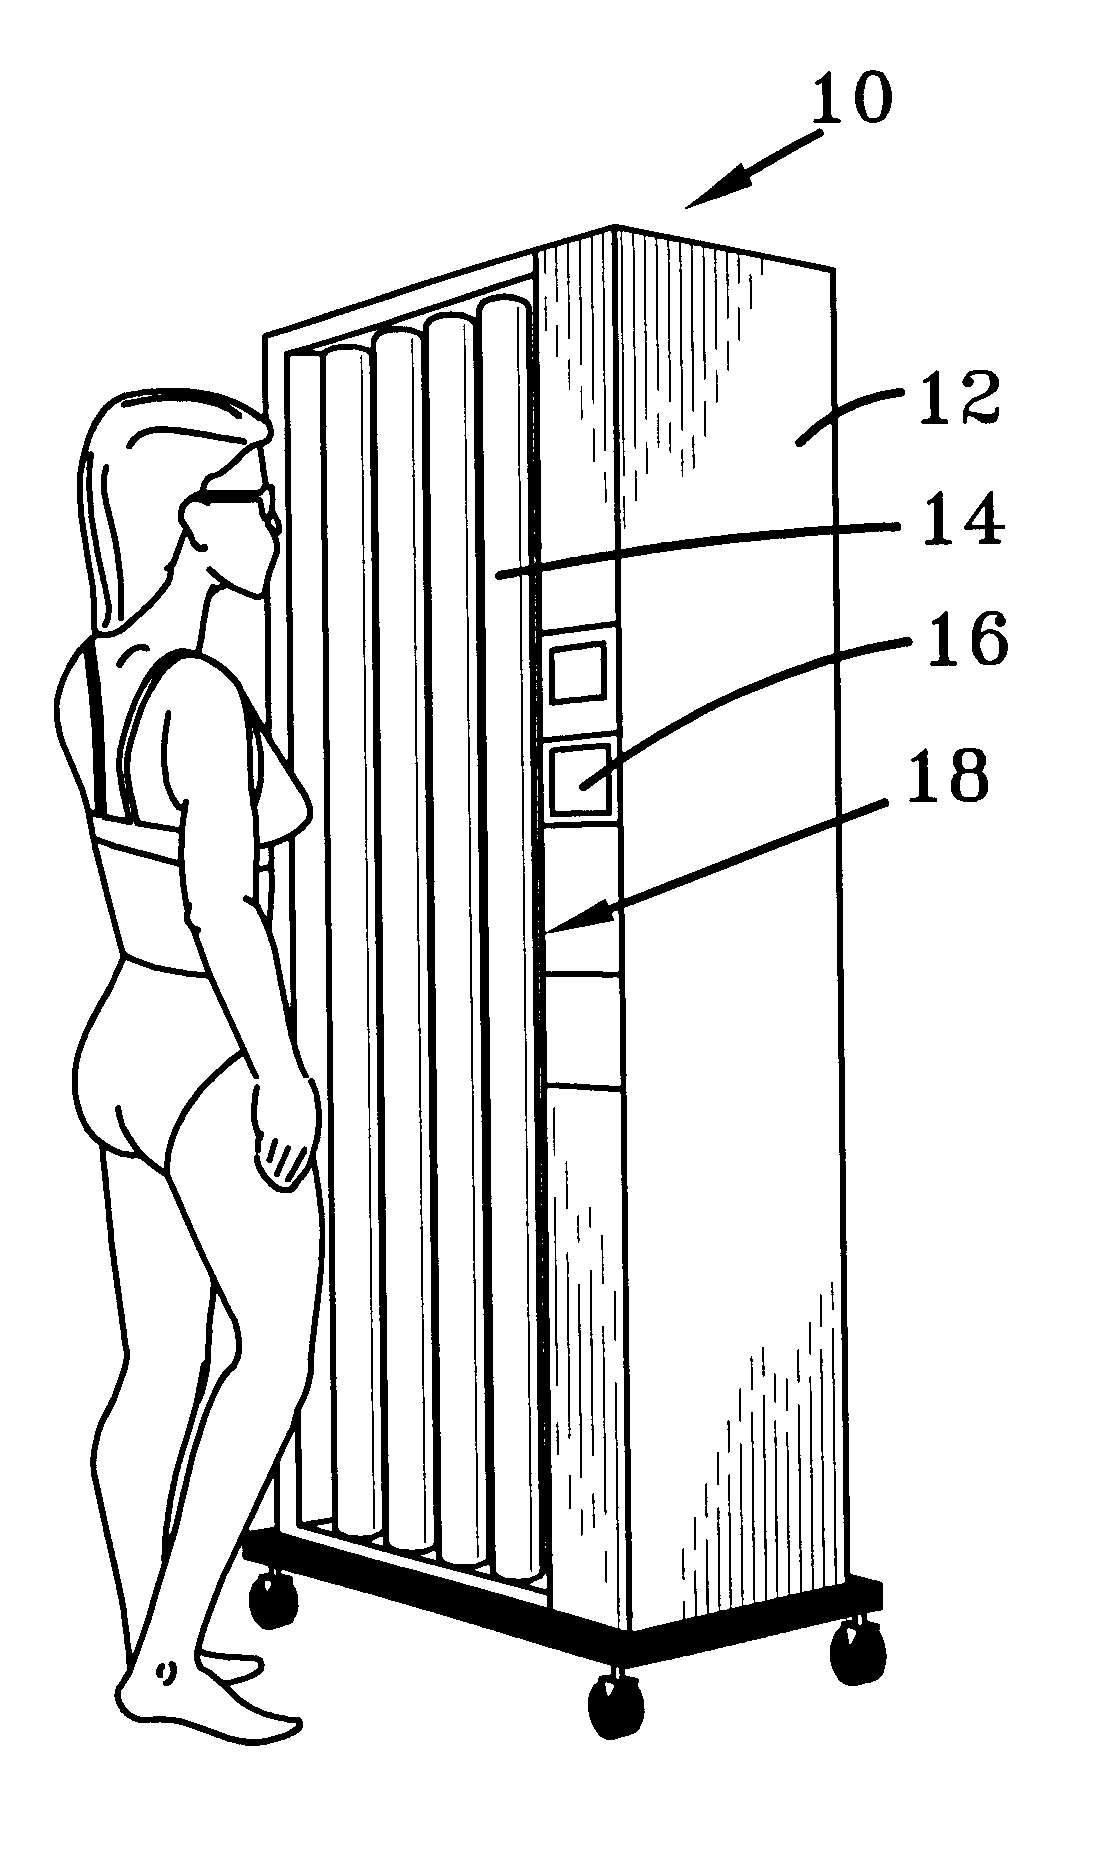 Phototherapeutic device and method